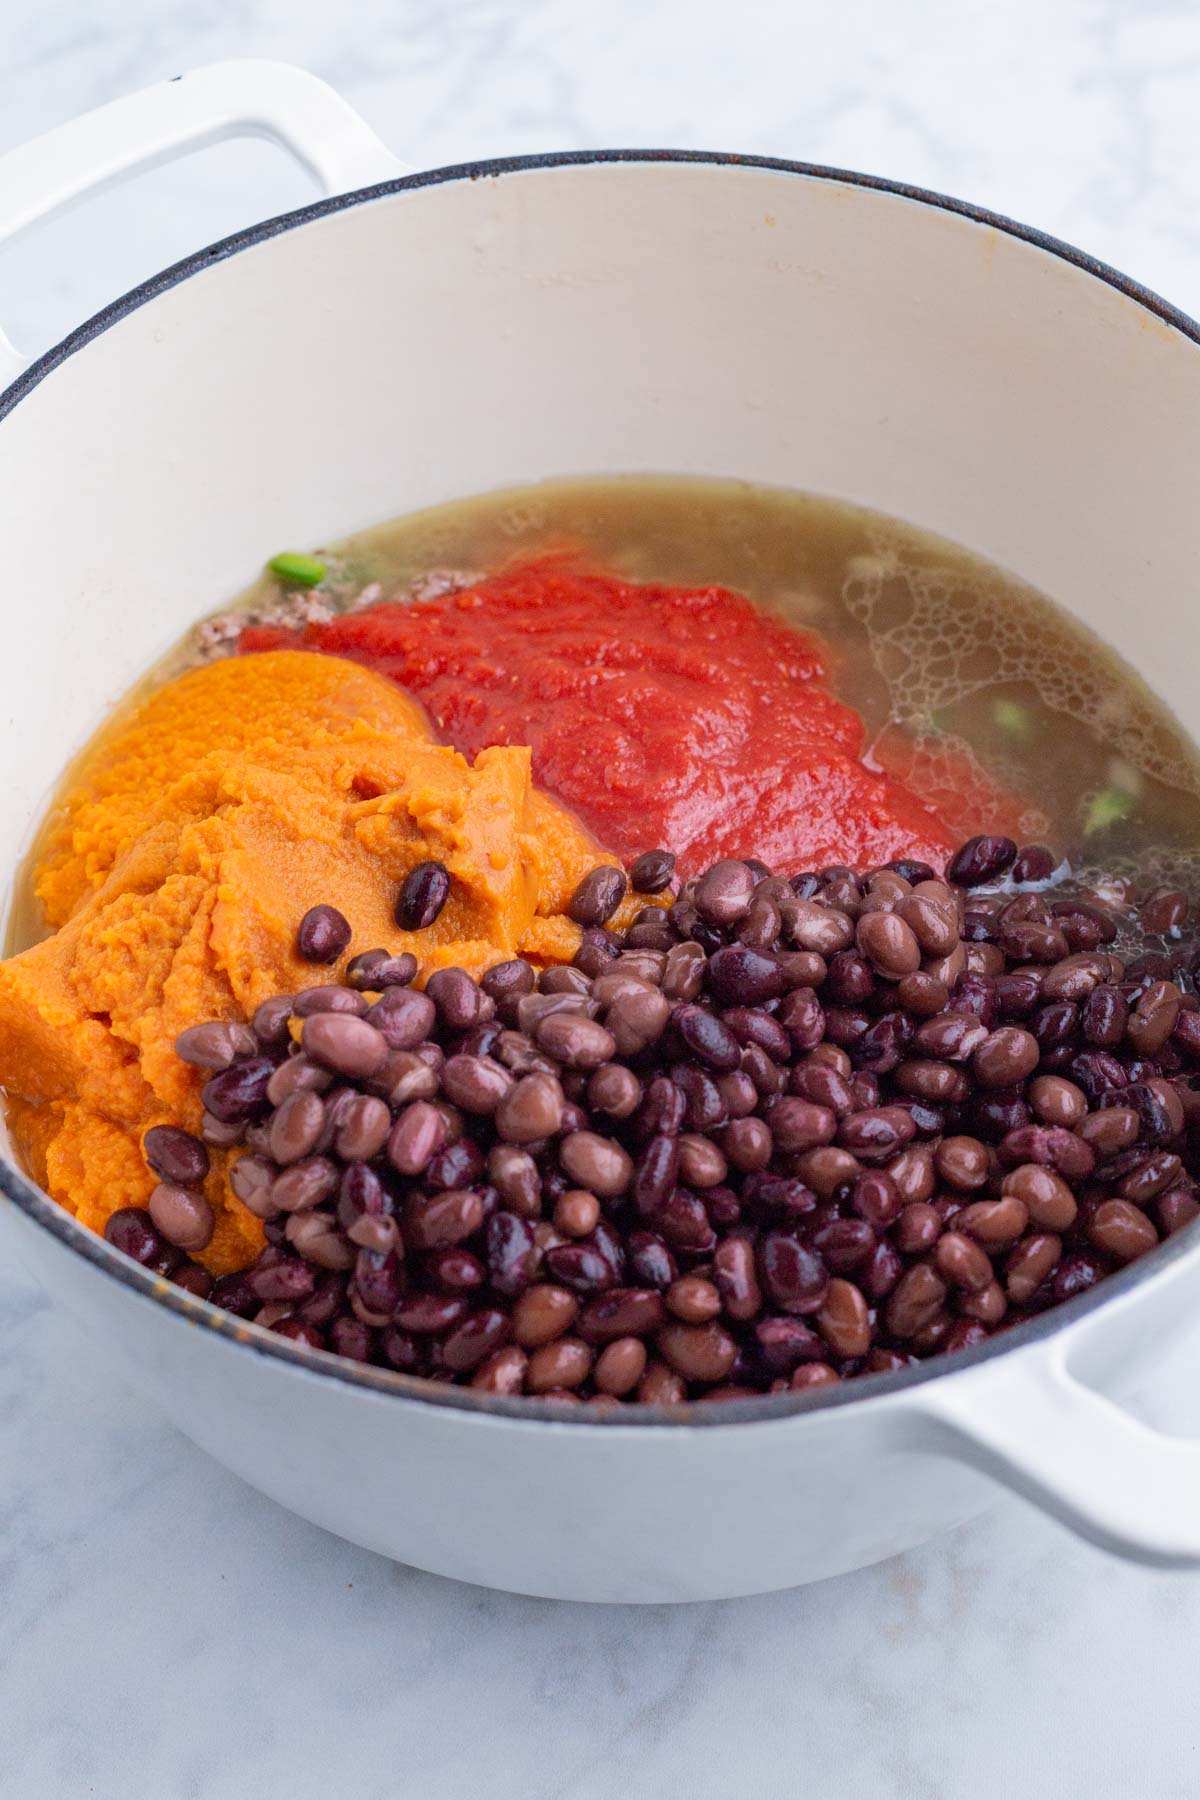 Beans, pumpkin, and tomato are added to the pot.